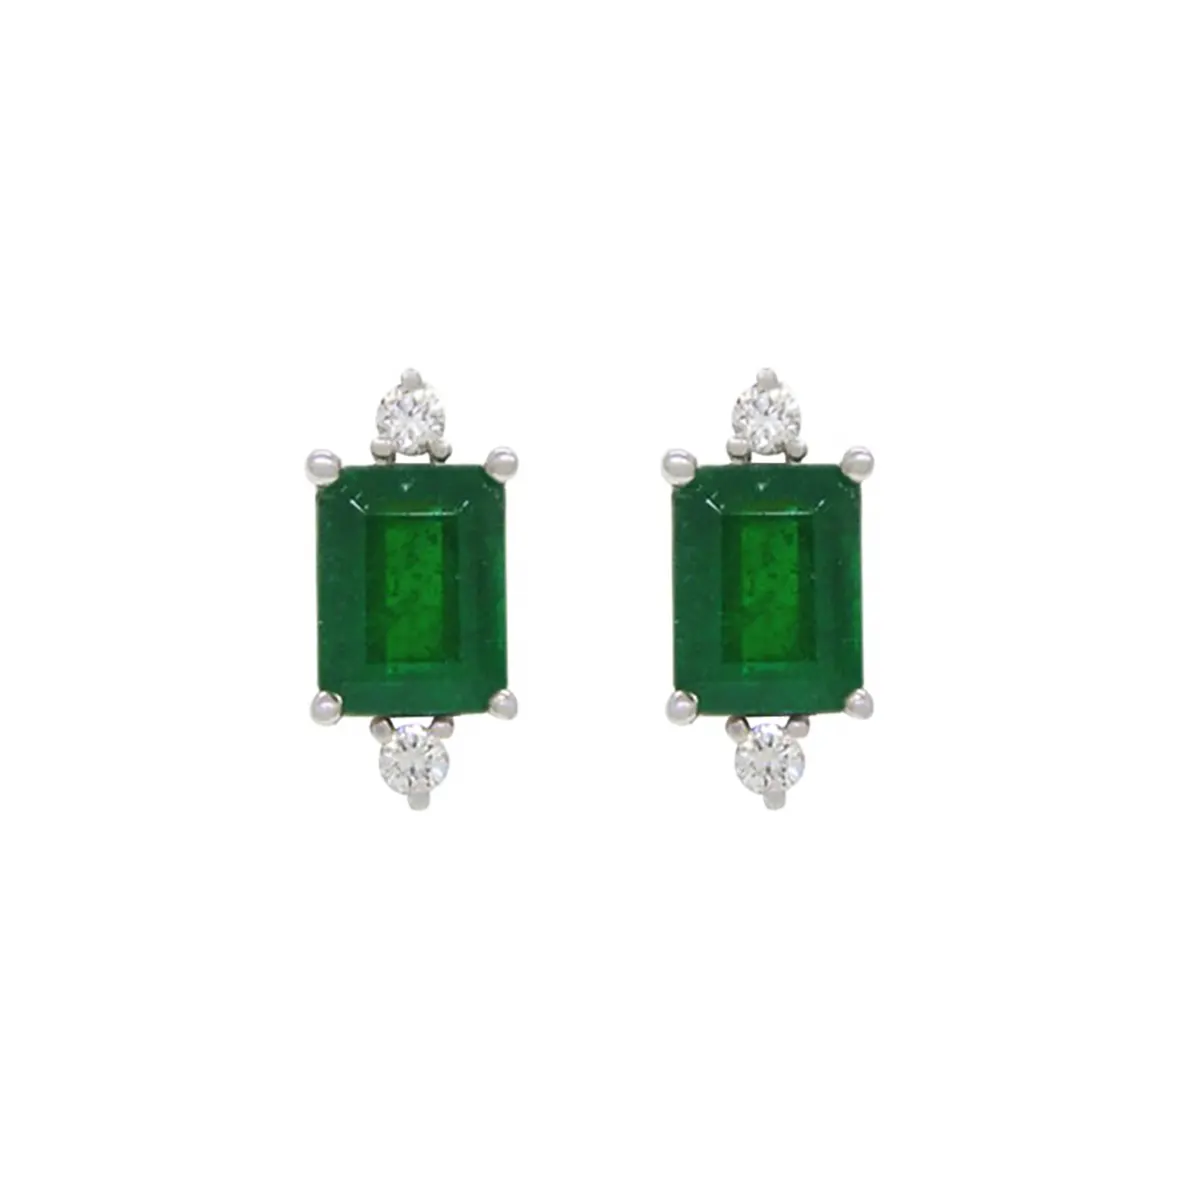 Emerald Cut Natural Emeralds Set in 18K White Gold Stud Earrings With Round Diamonds